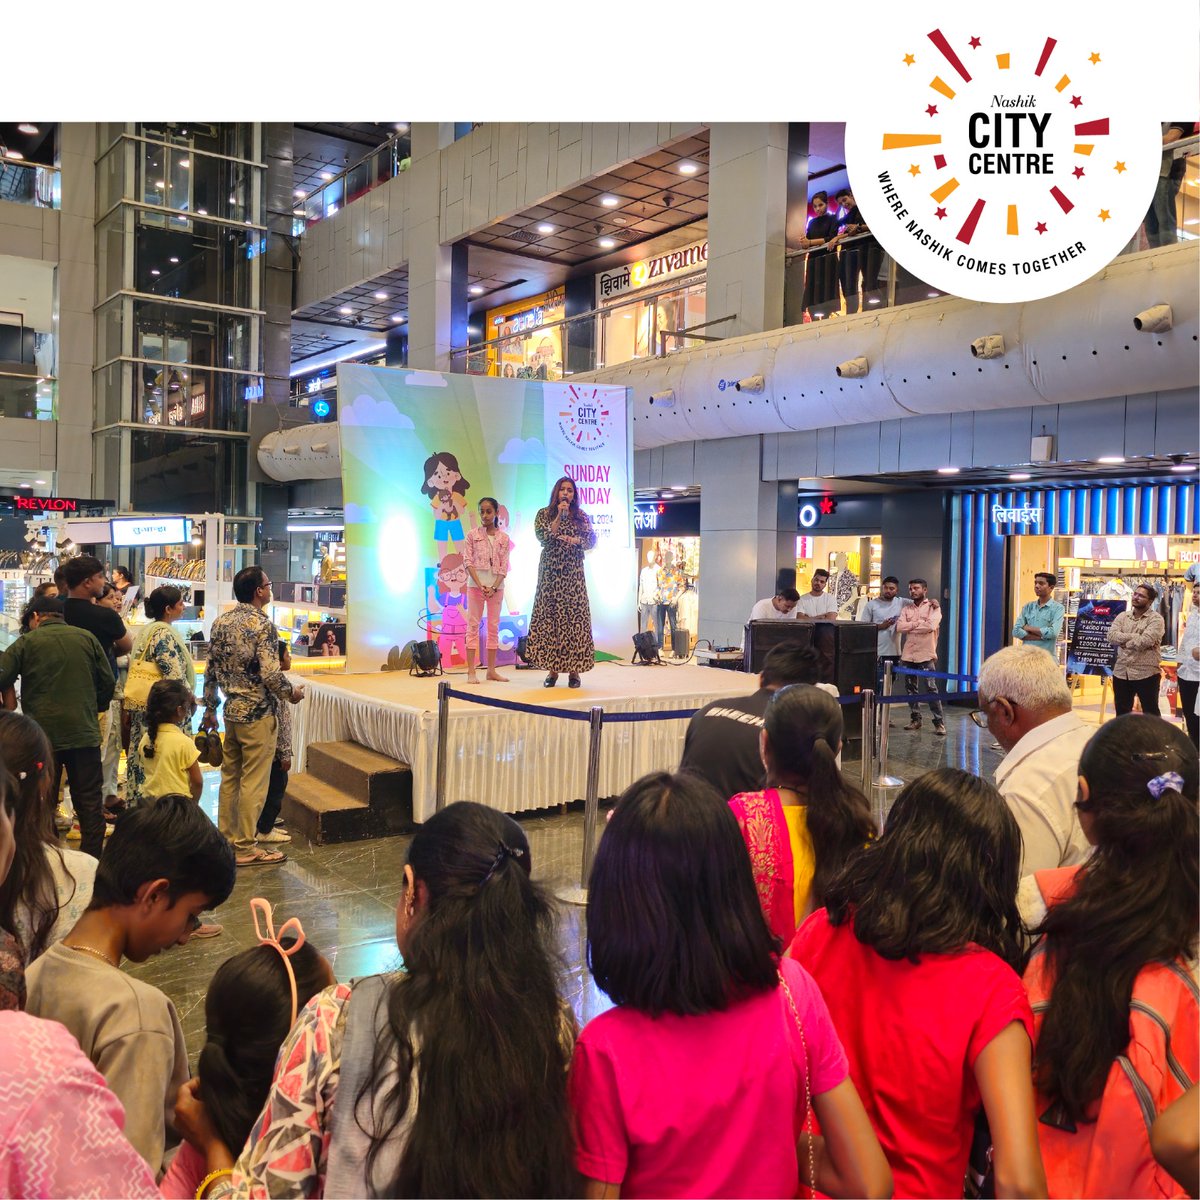 Sunday Fun at City Centre Mall: Where Adventure Awaits Around Every Corner! From carousel rides to arcade games, there's endless fun for kids of all ages. Let imaginations run wild and laughter fill

#sunday #sundayfunday #ccm #citycentremall
 #nashik #nashikcity